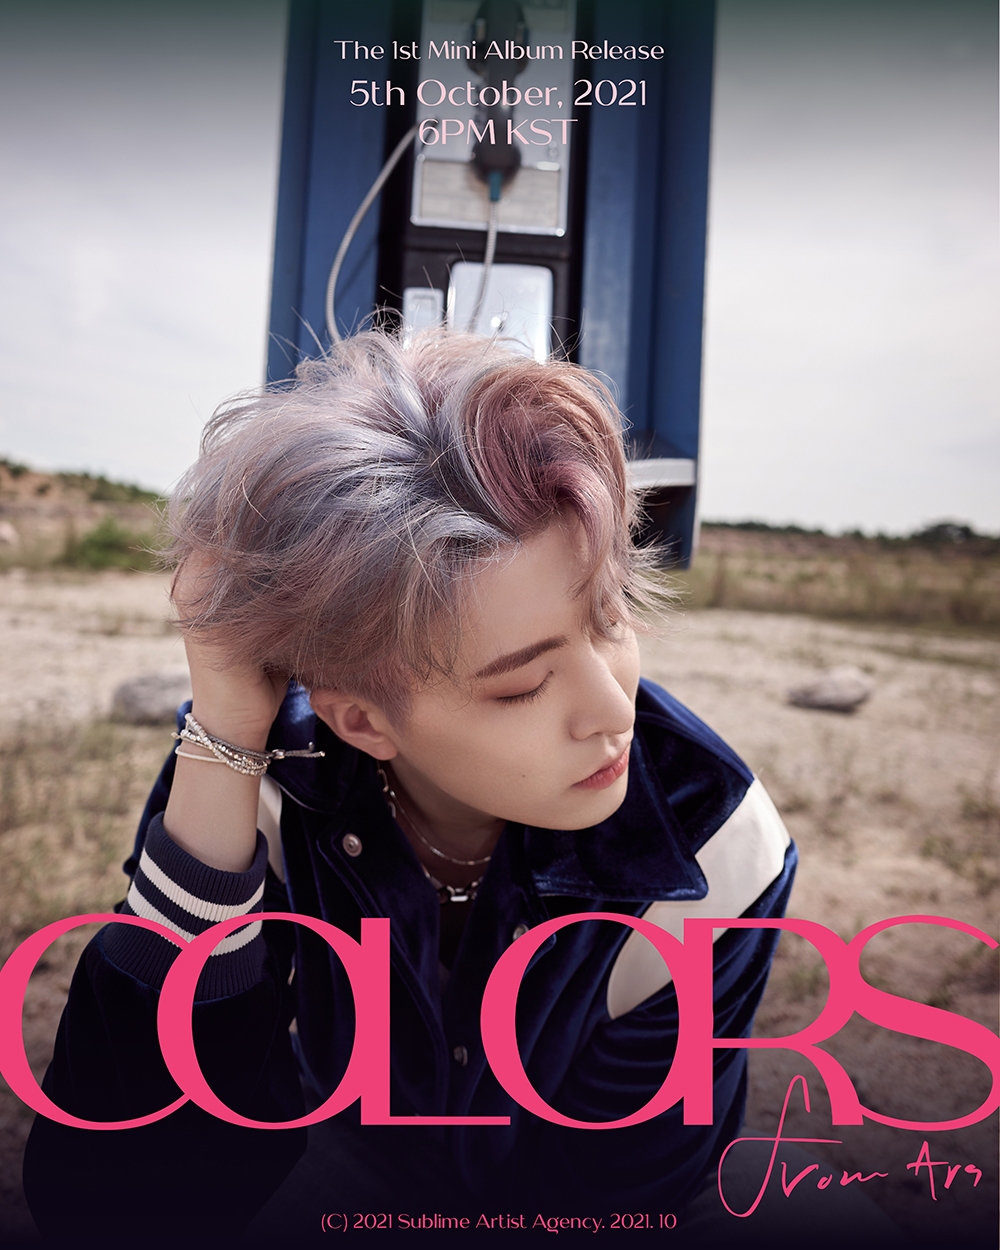 COLORS from Ars_teaser7